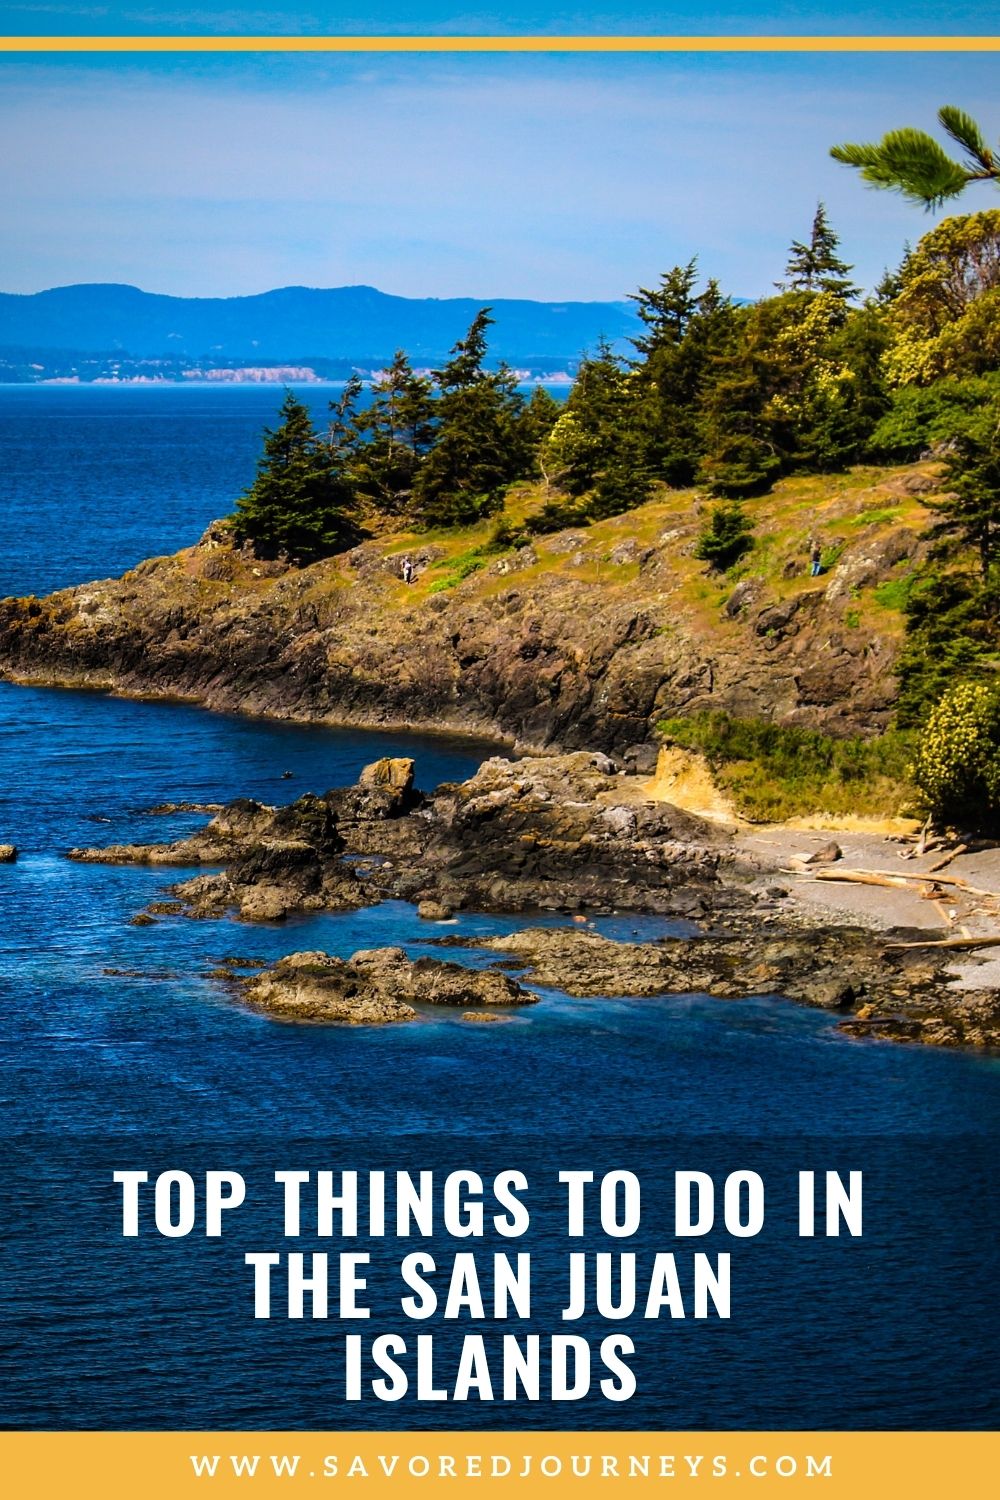 Top Things to Do in the San Juan Islands